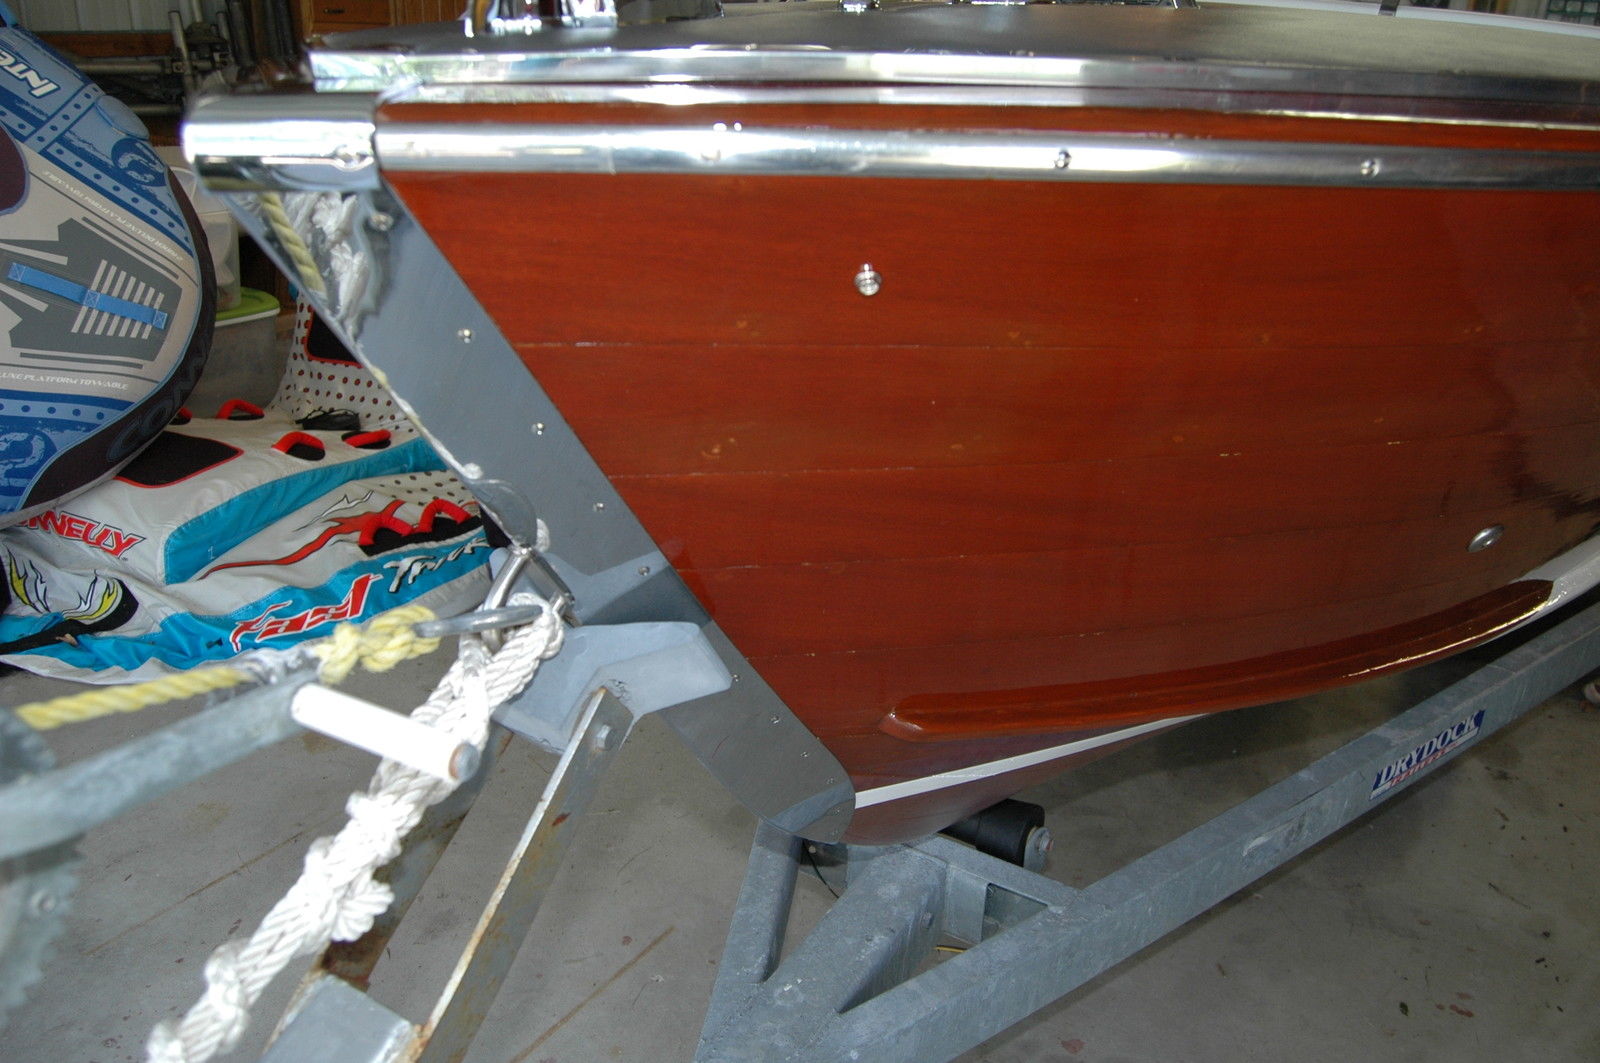 Century Resorter 1965 for sale for $16,500 - Boats-from ...